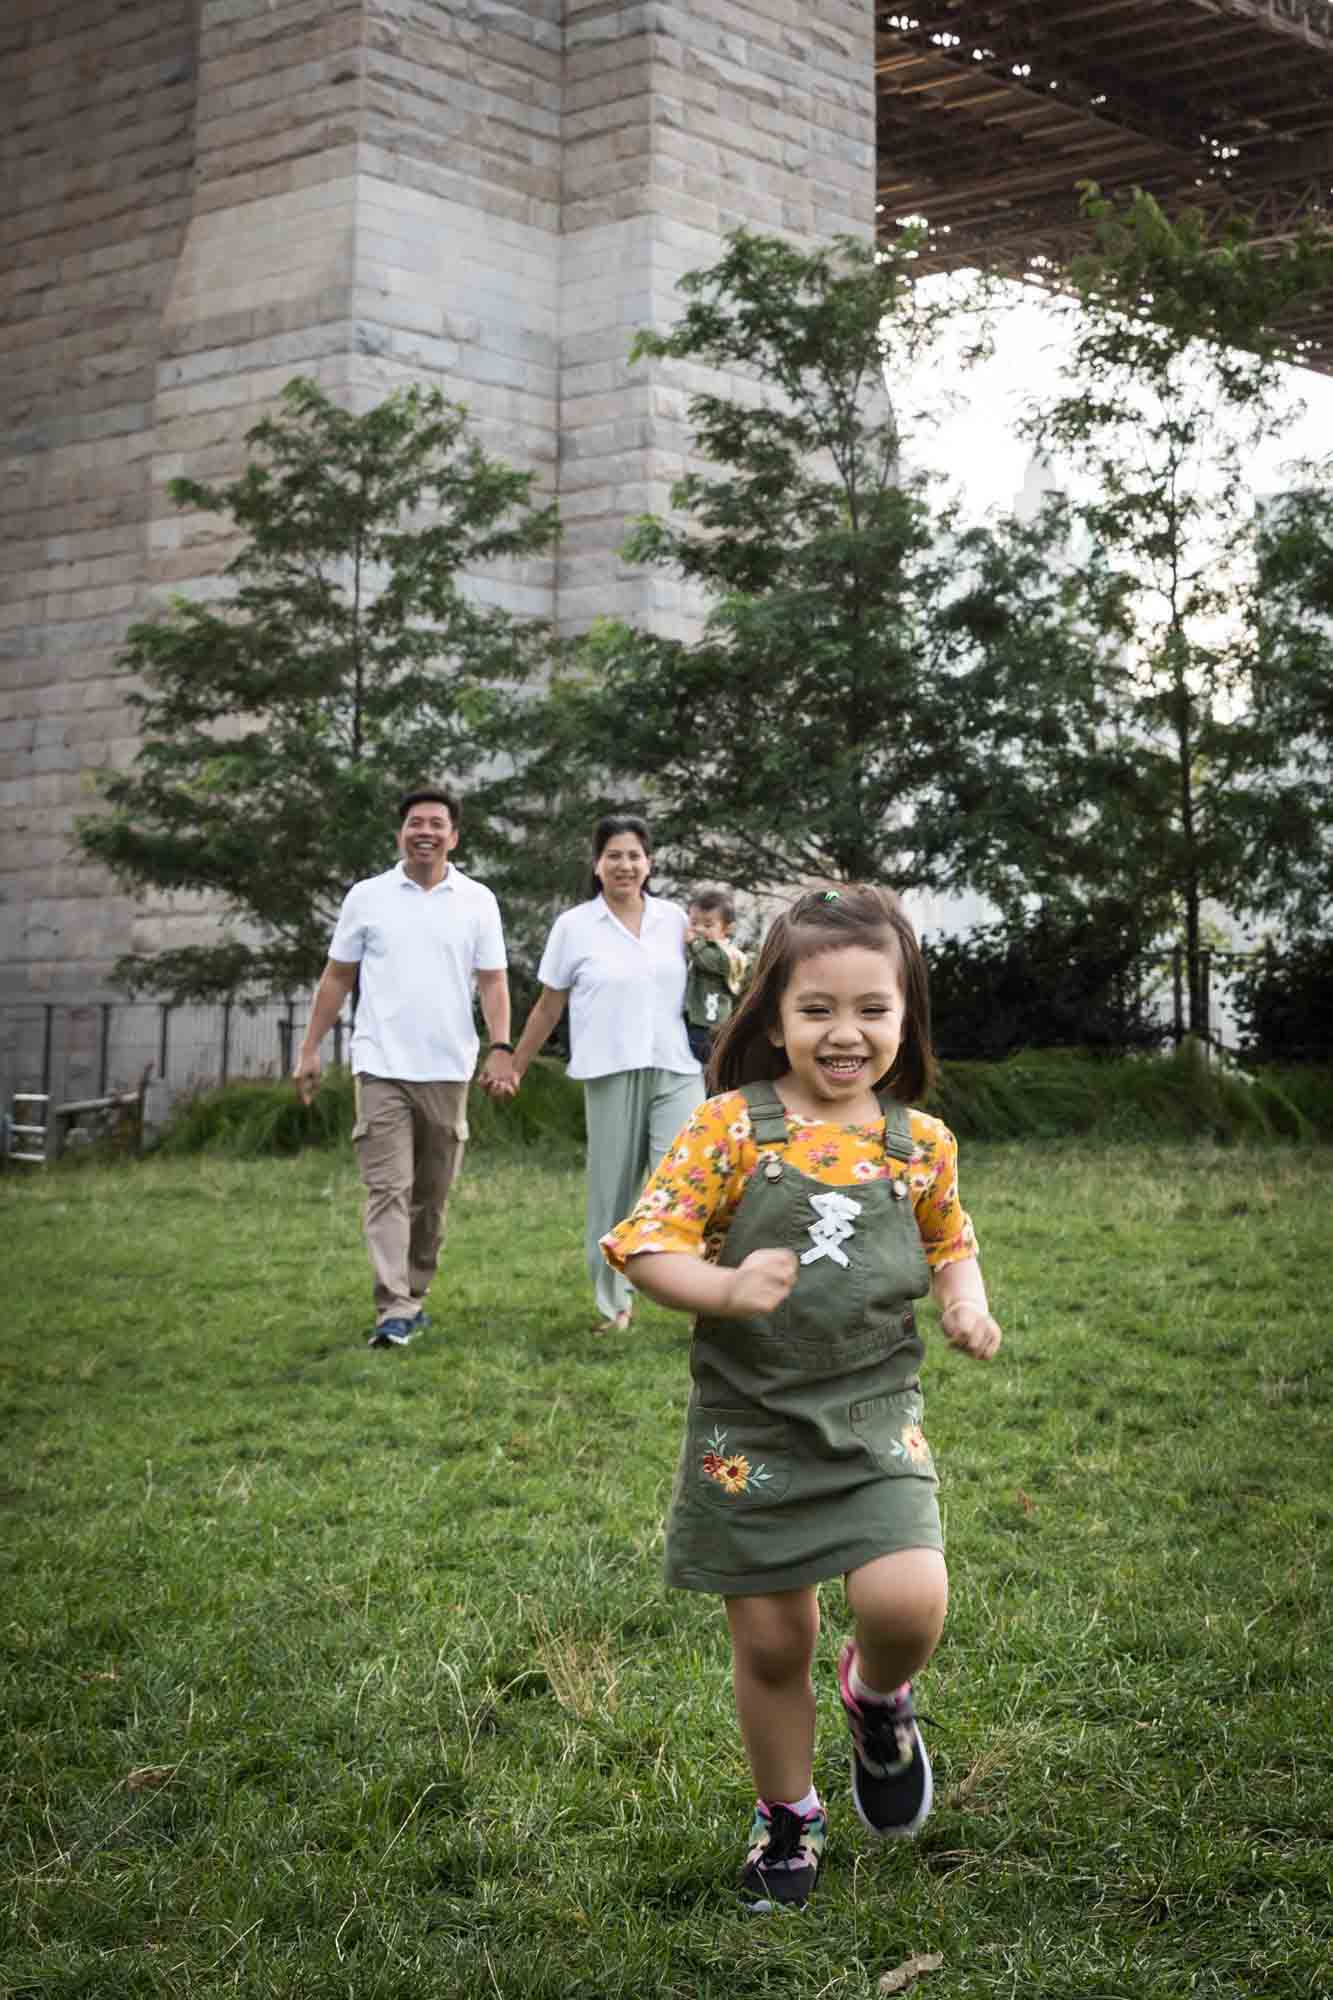 Little girl running in front of parents for an article on Brooklyn Bridge Park family portrait tips for young children